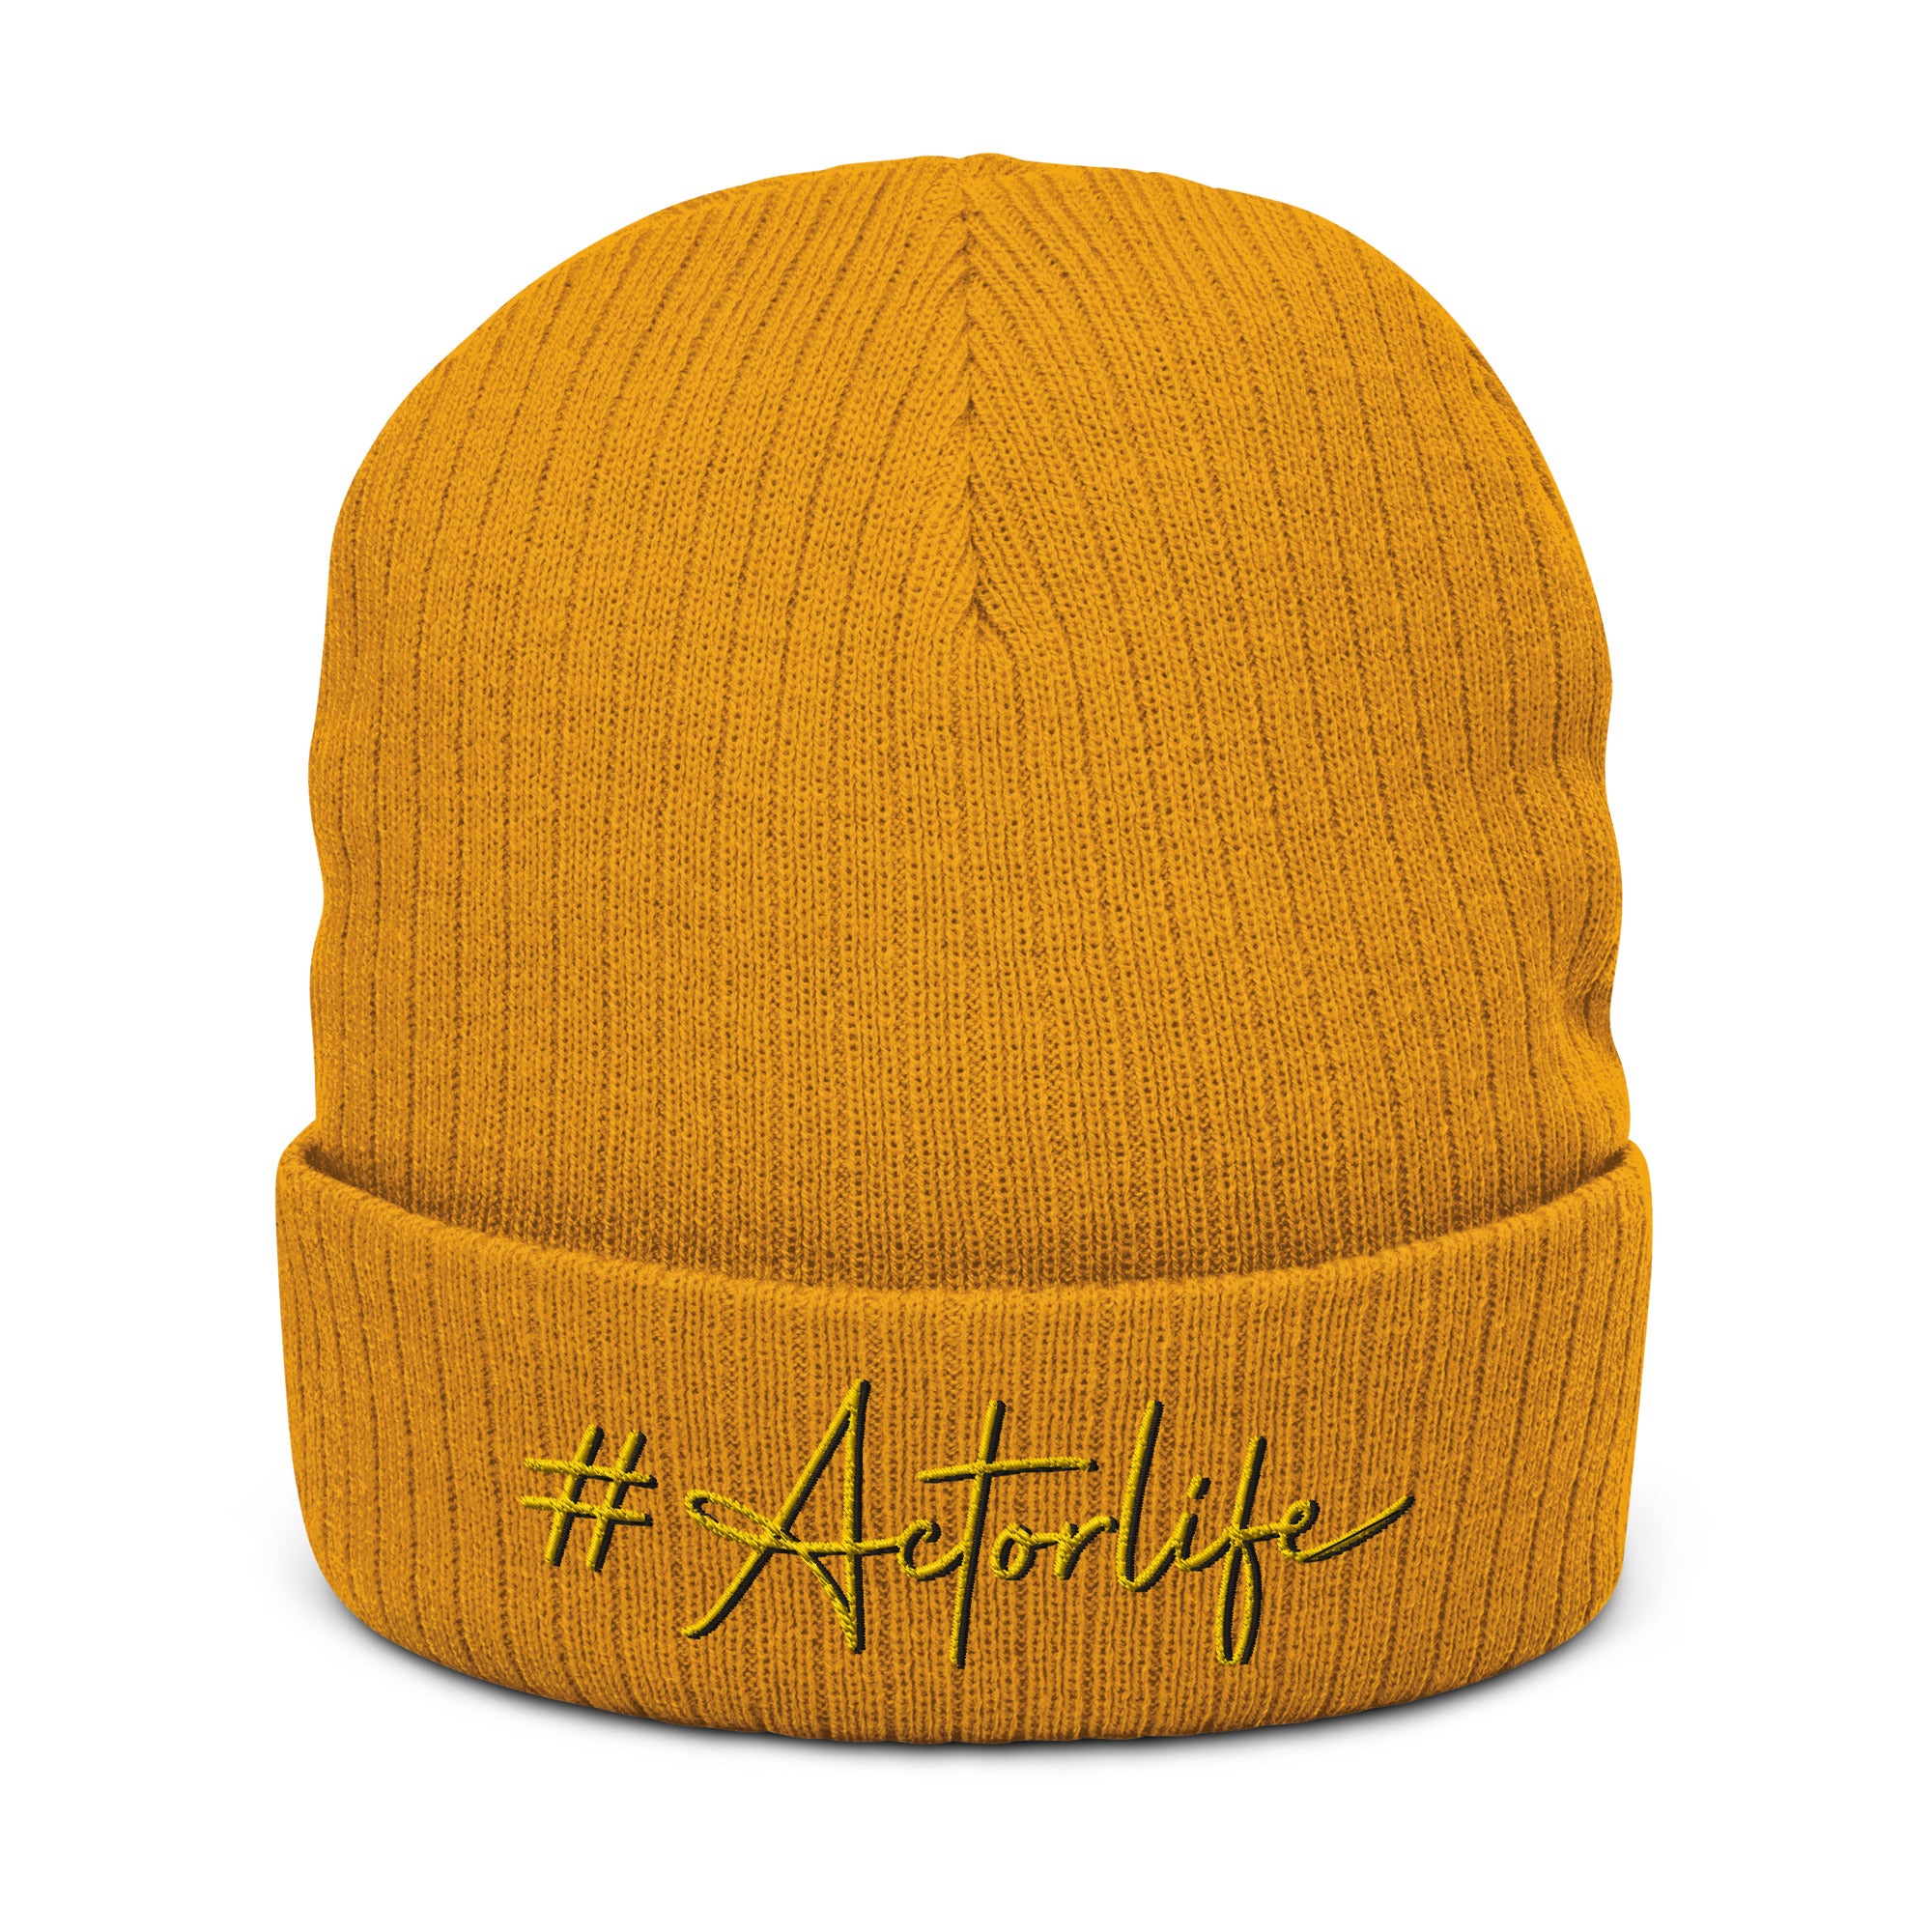 #Actorlife - Embroidered Ribbed knit beanie